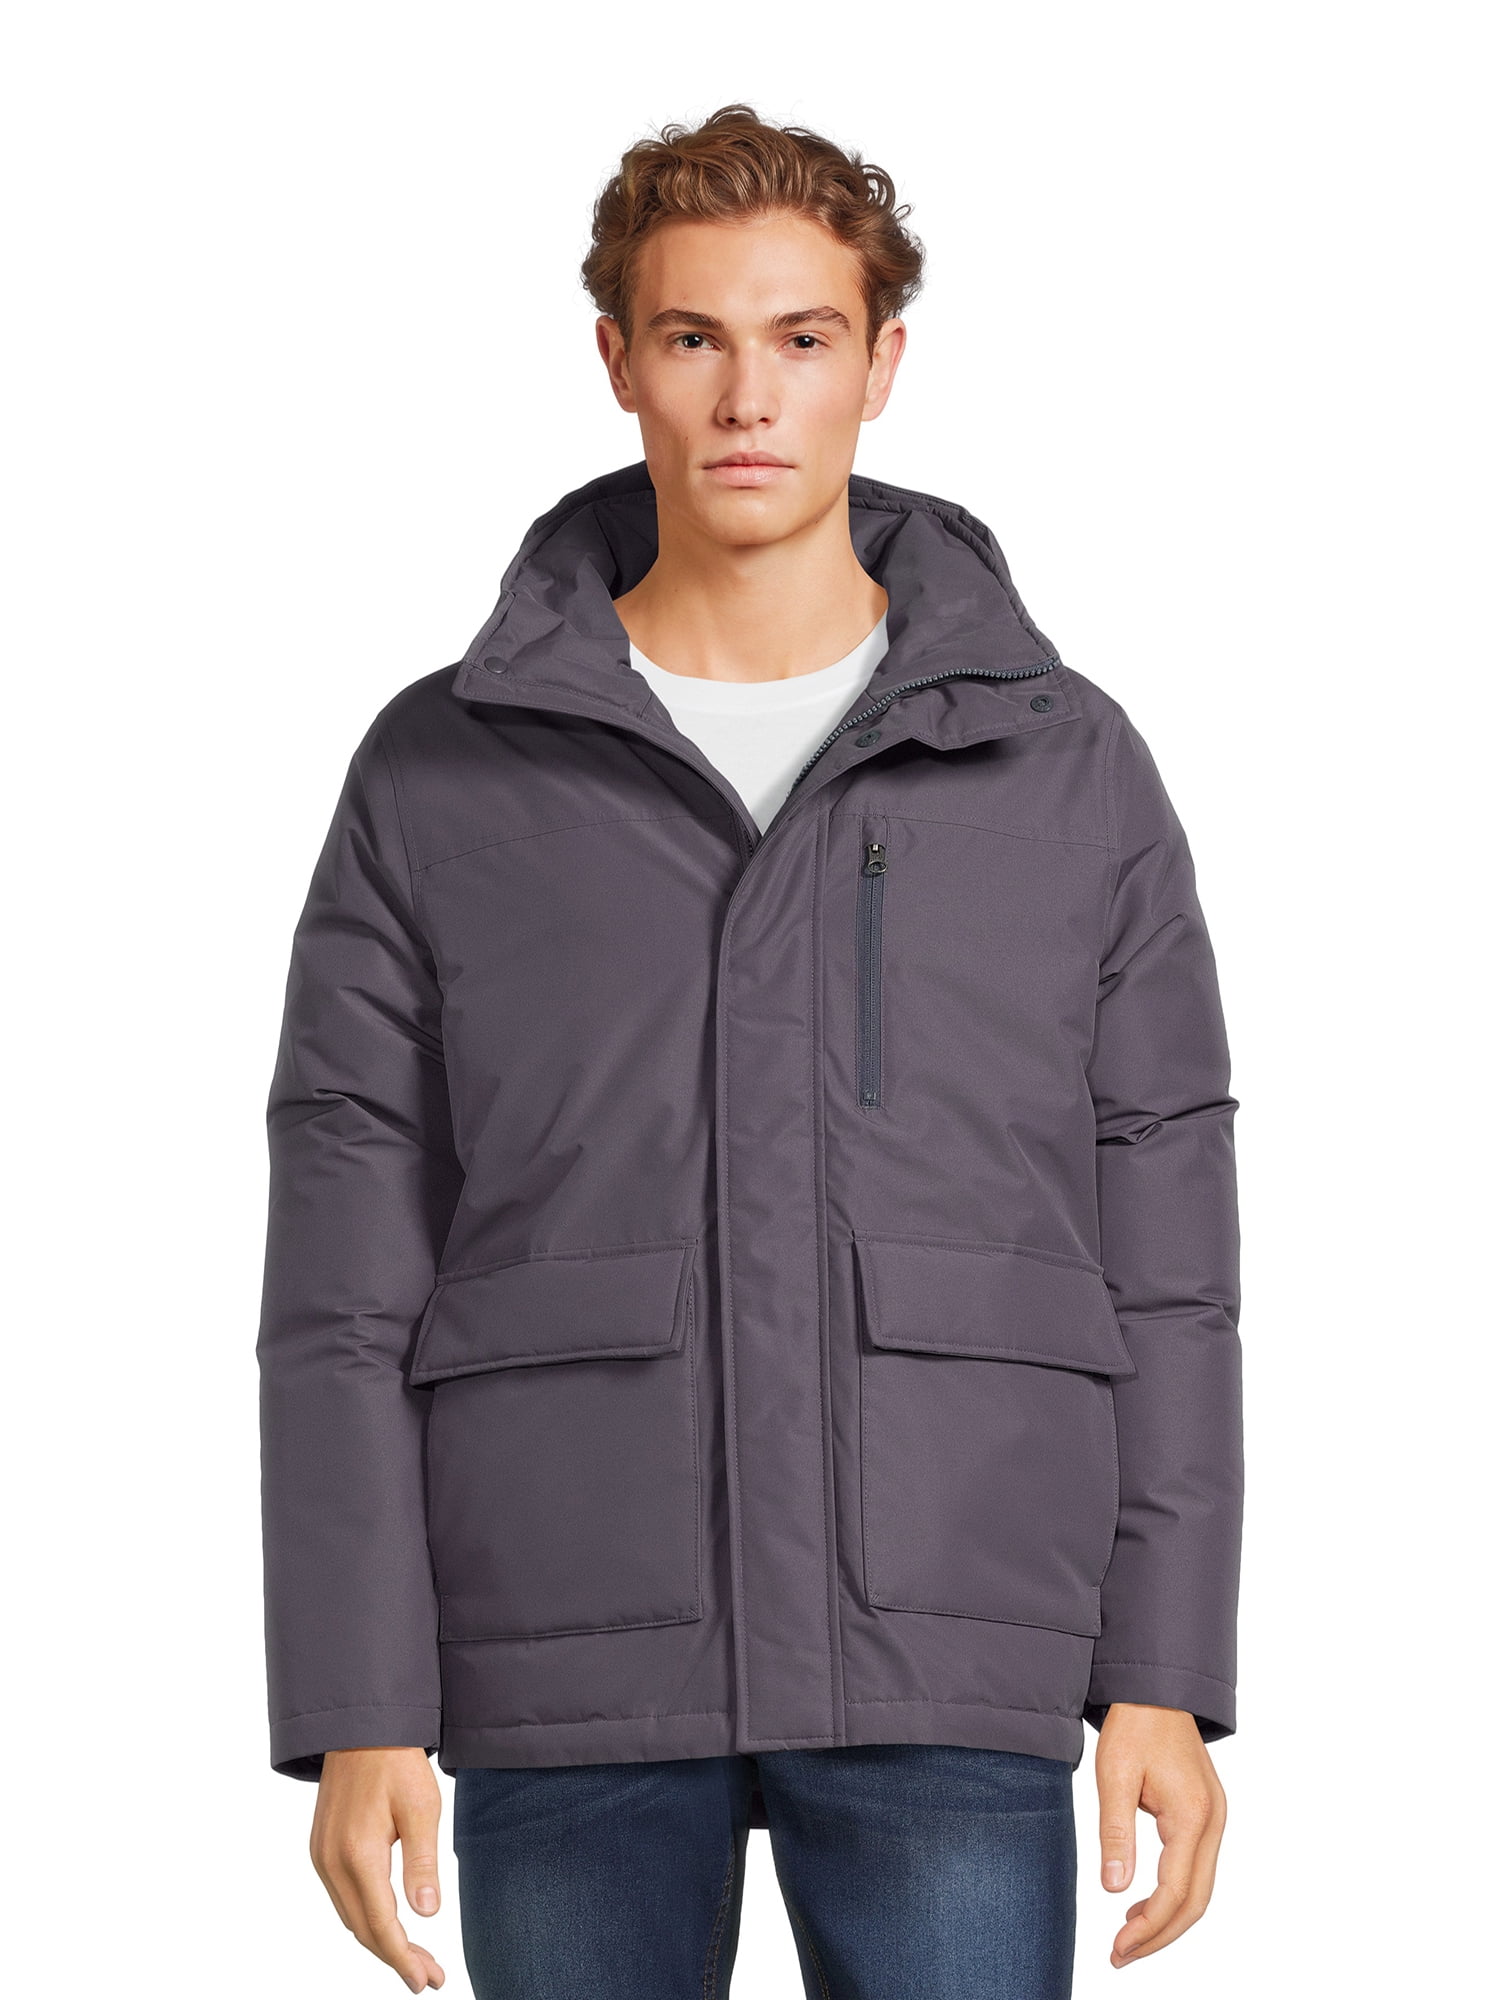 Swiss Tech Men's Water Resistant Midweight Jacket with Hood, Sizes S ...